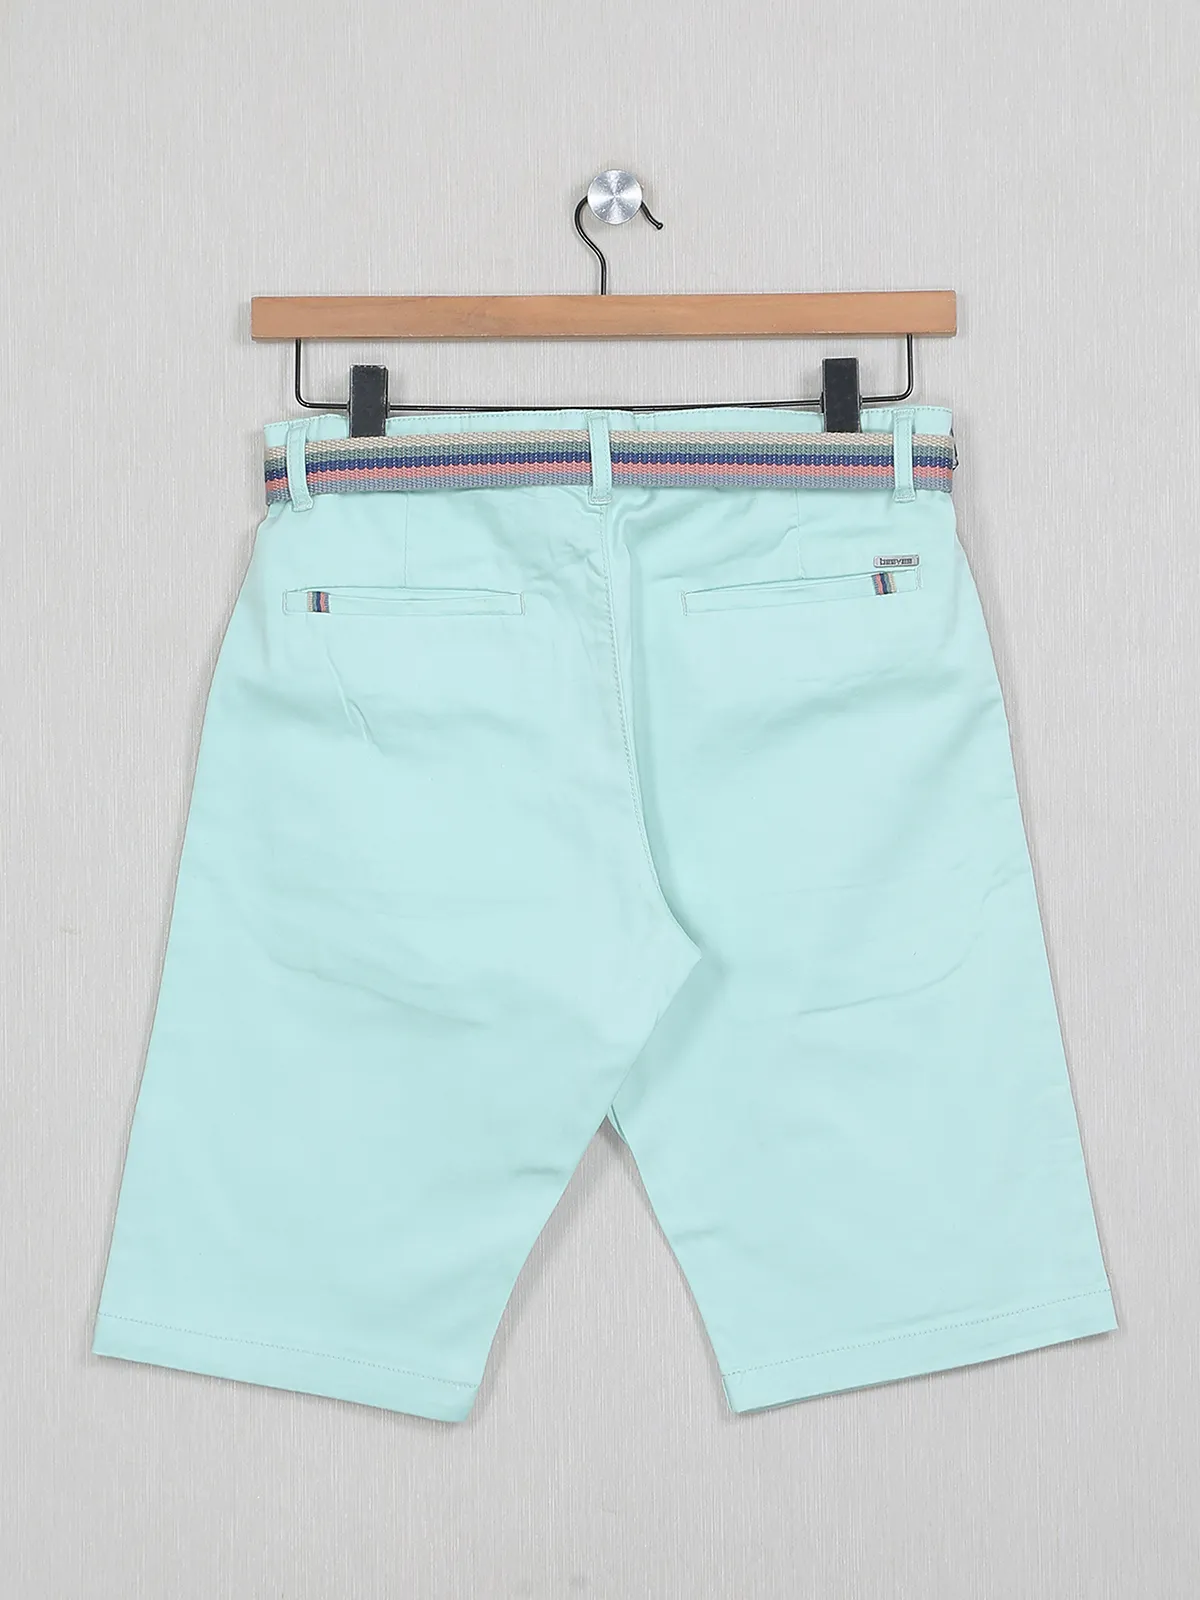 Bee Vee mint casual cotton shorts